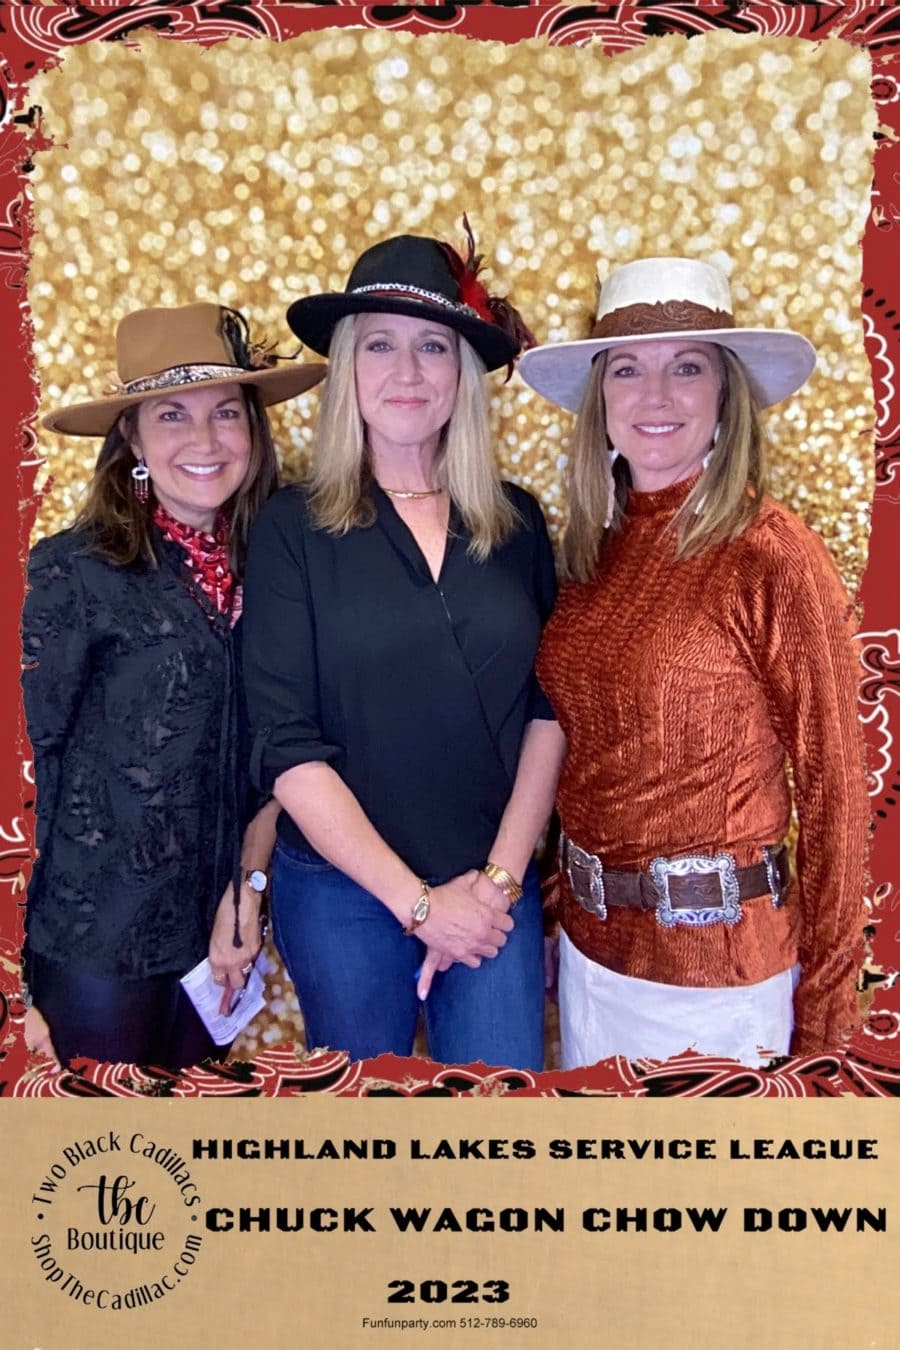 photo+booth+gallery+funfunparty_Selfie_Photobooth_Highland_Lakes_Service_leage_Gala_Burnet_TX